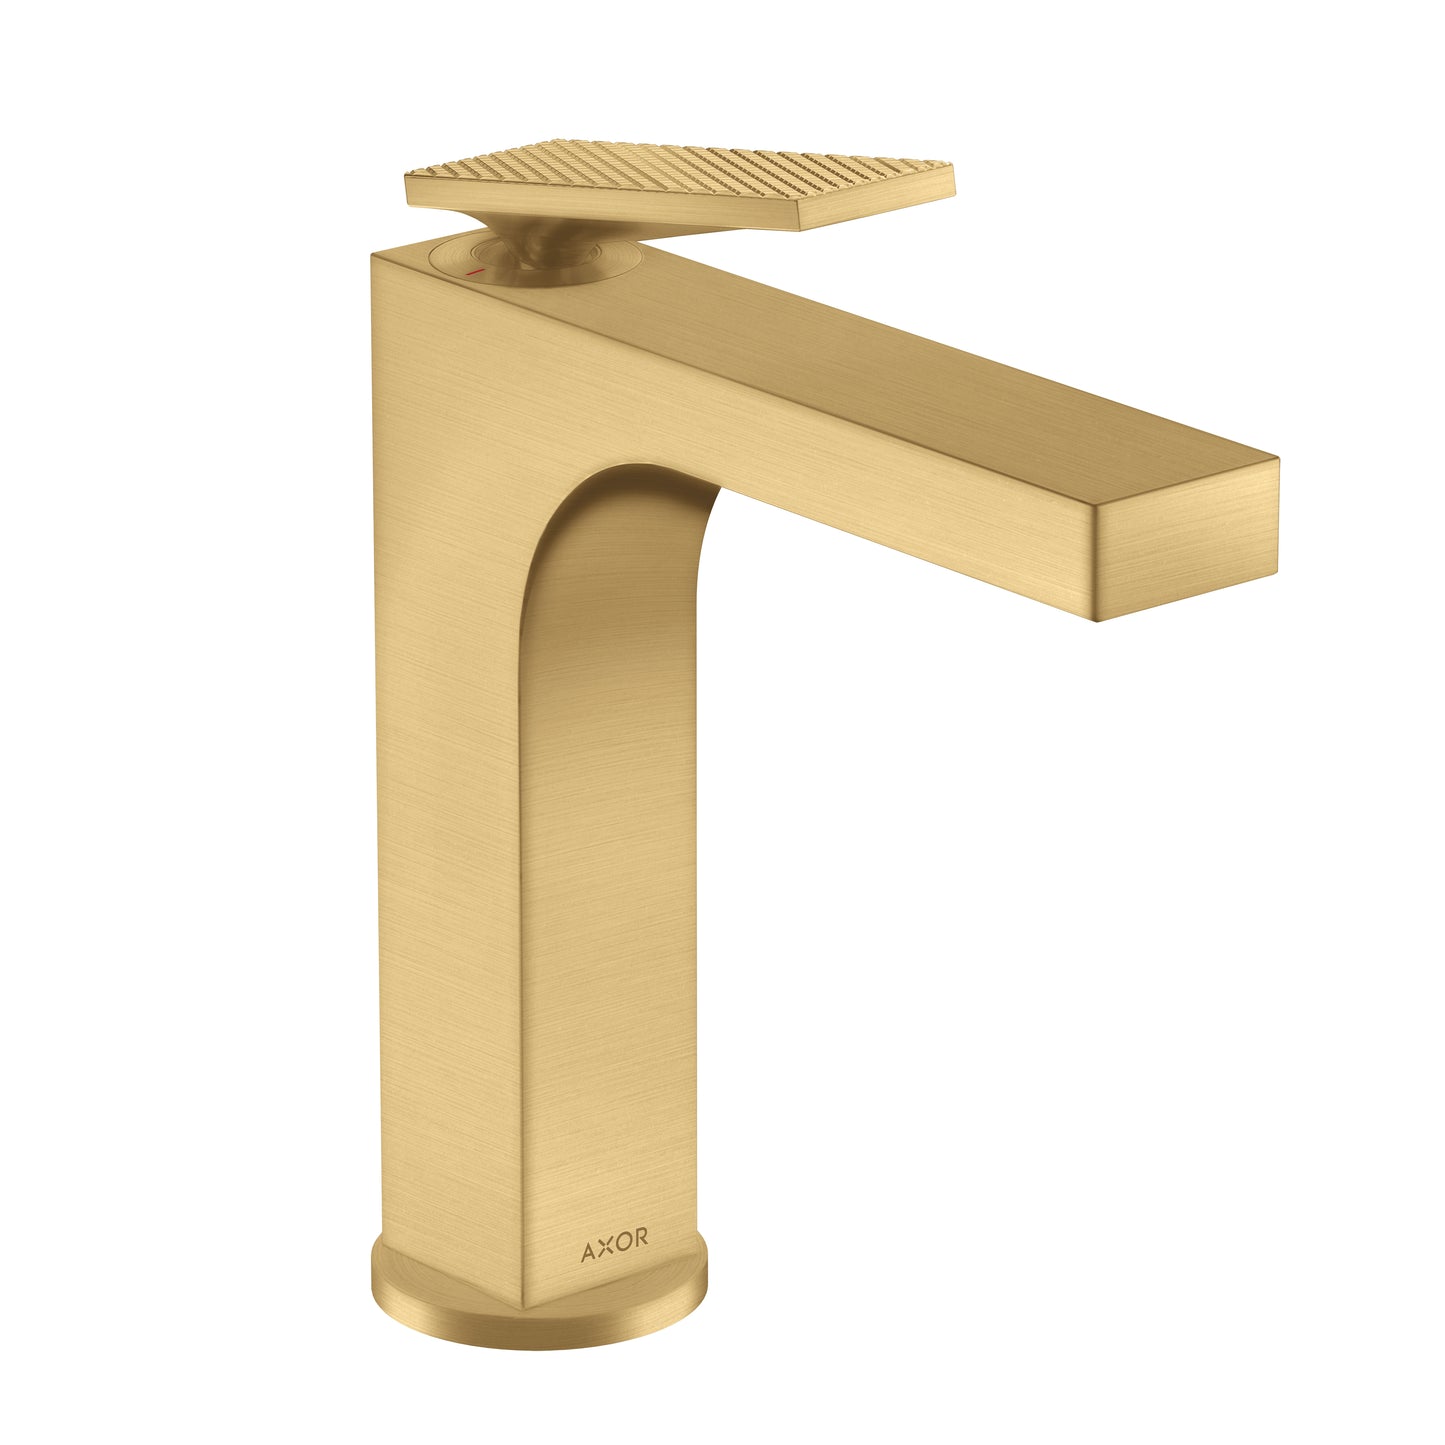 AXOR 39071251 Brushed Gold Optic Citterio Modern Single Hole Bathroom Faucet 1.2 GPM